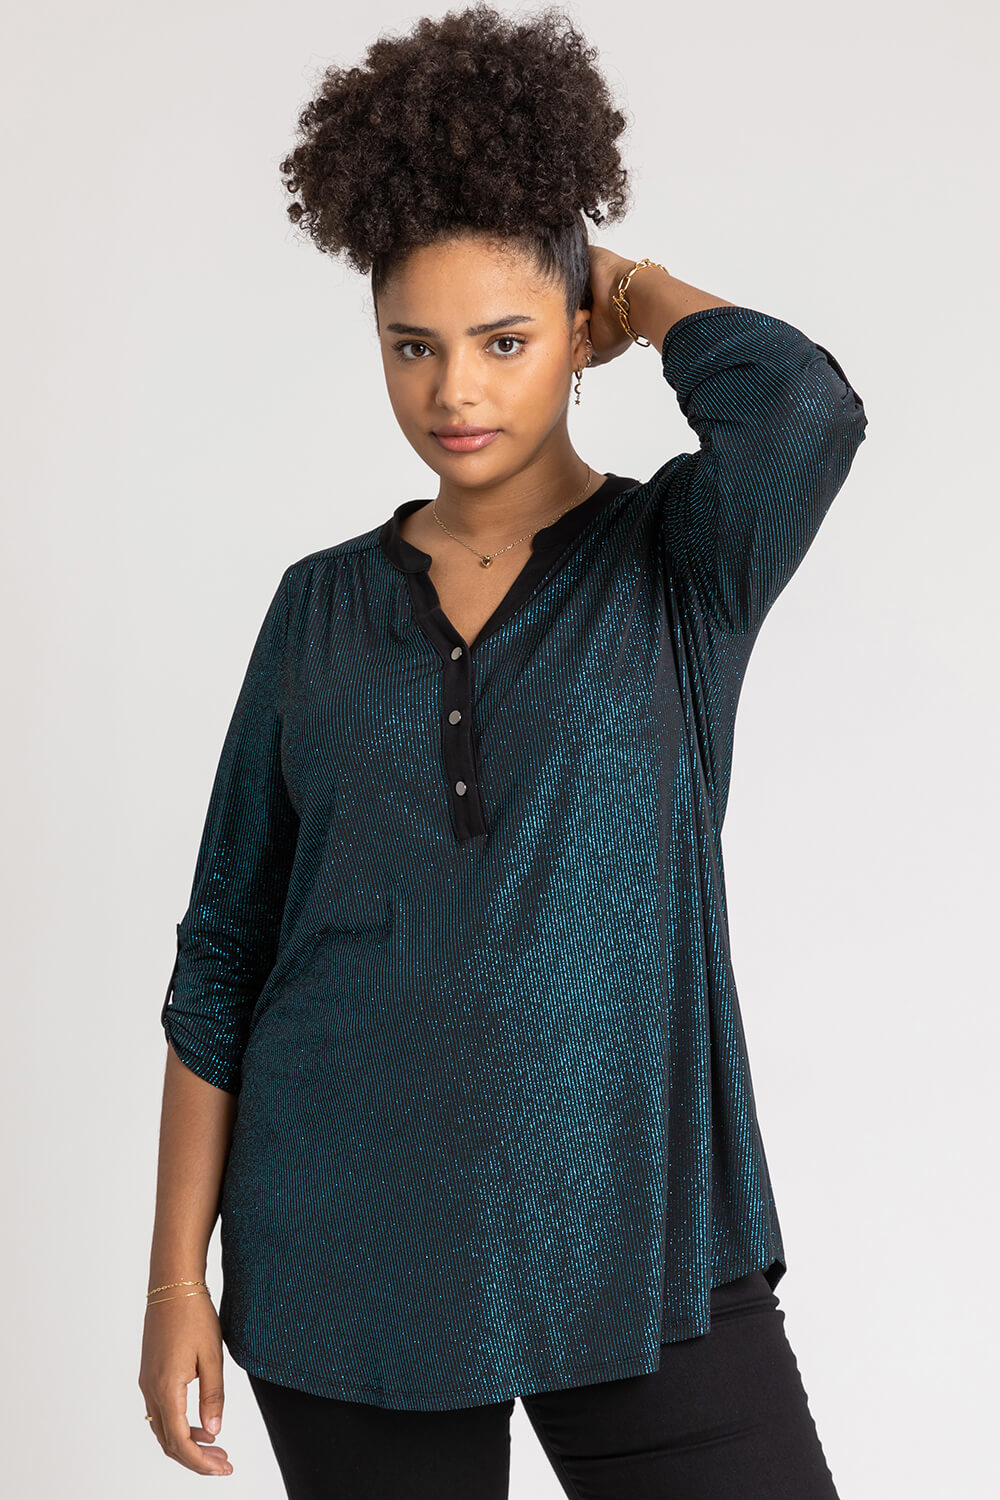 Teal Curve Glitter Stripe Button Detail Top, Image 5 of 5